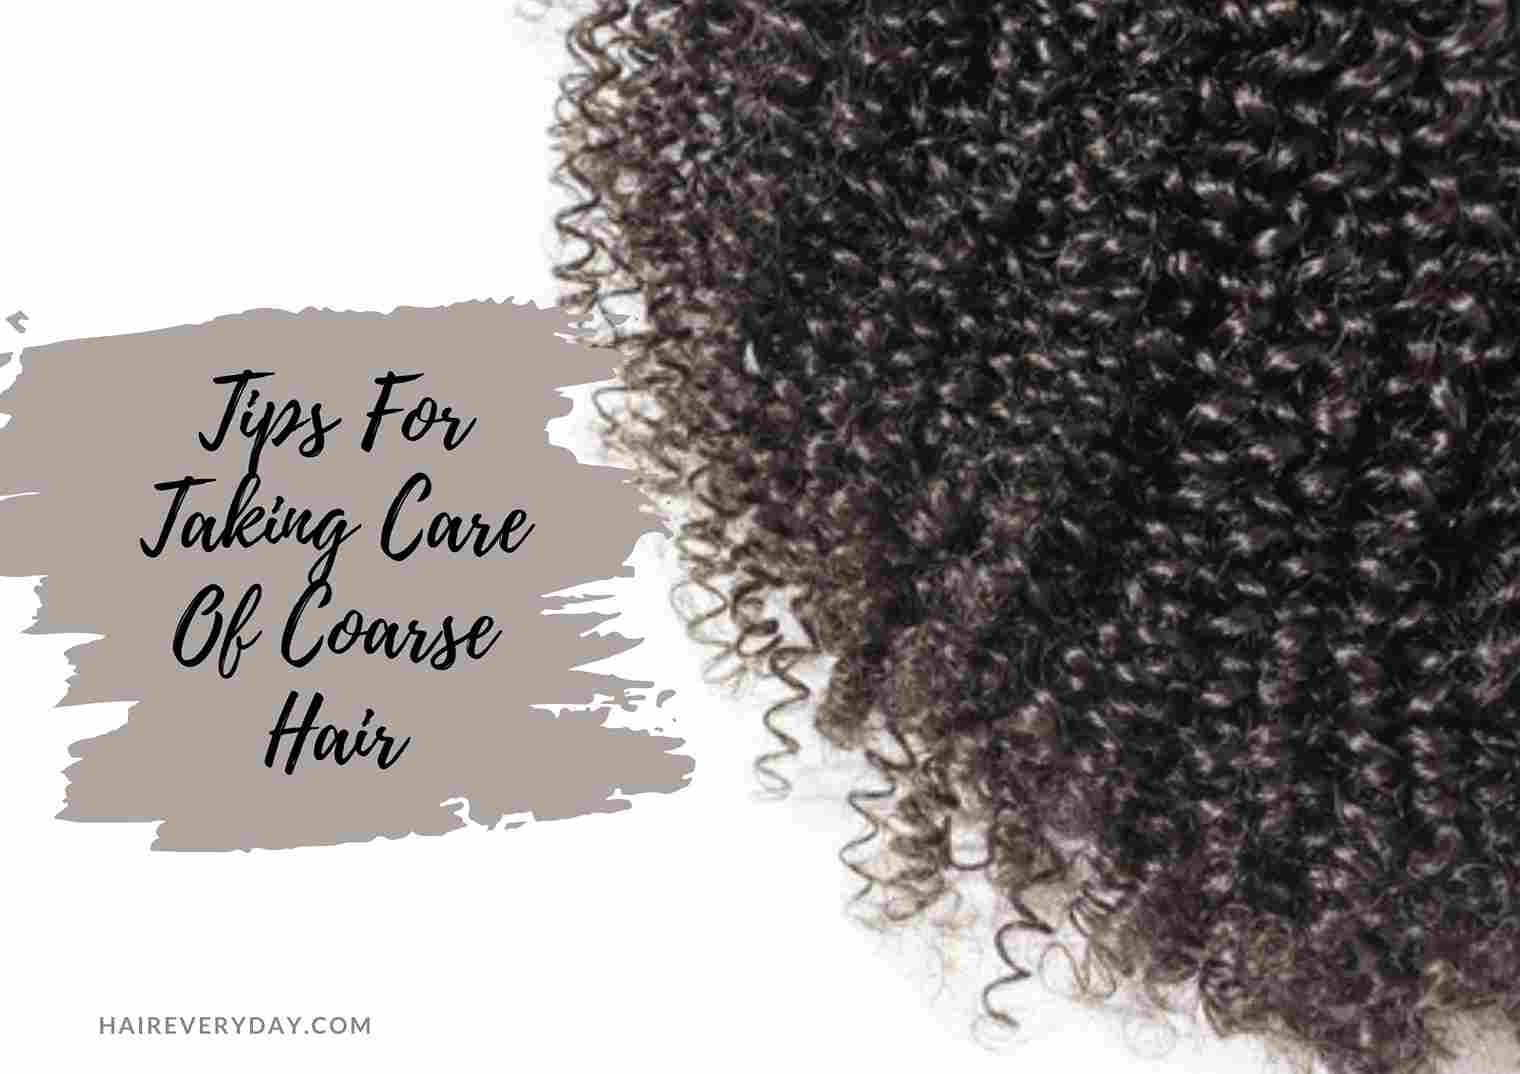 Coarse Hair Tips: Causes And 8 Easy Methods To Manage Coarse, Wiry Hair -  Hair Everyday Review